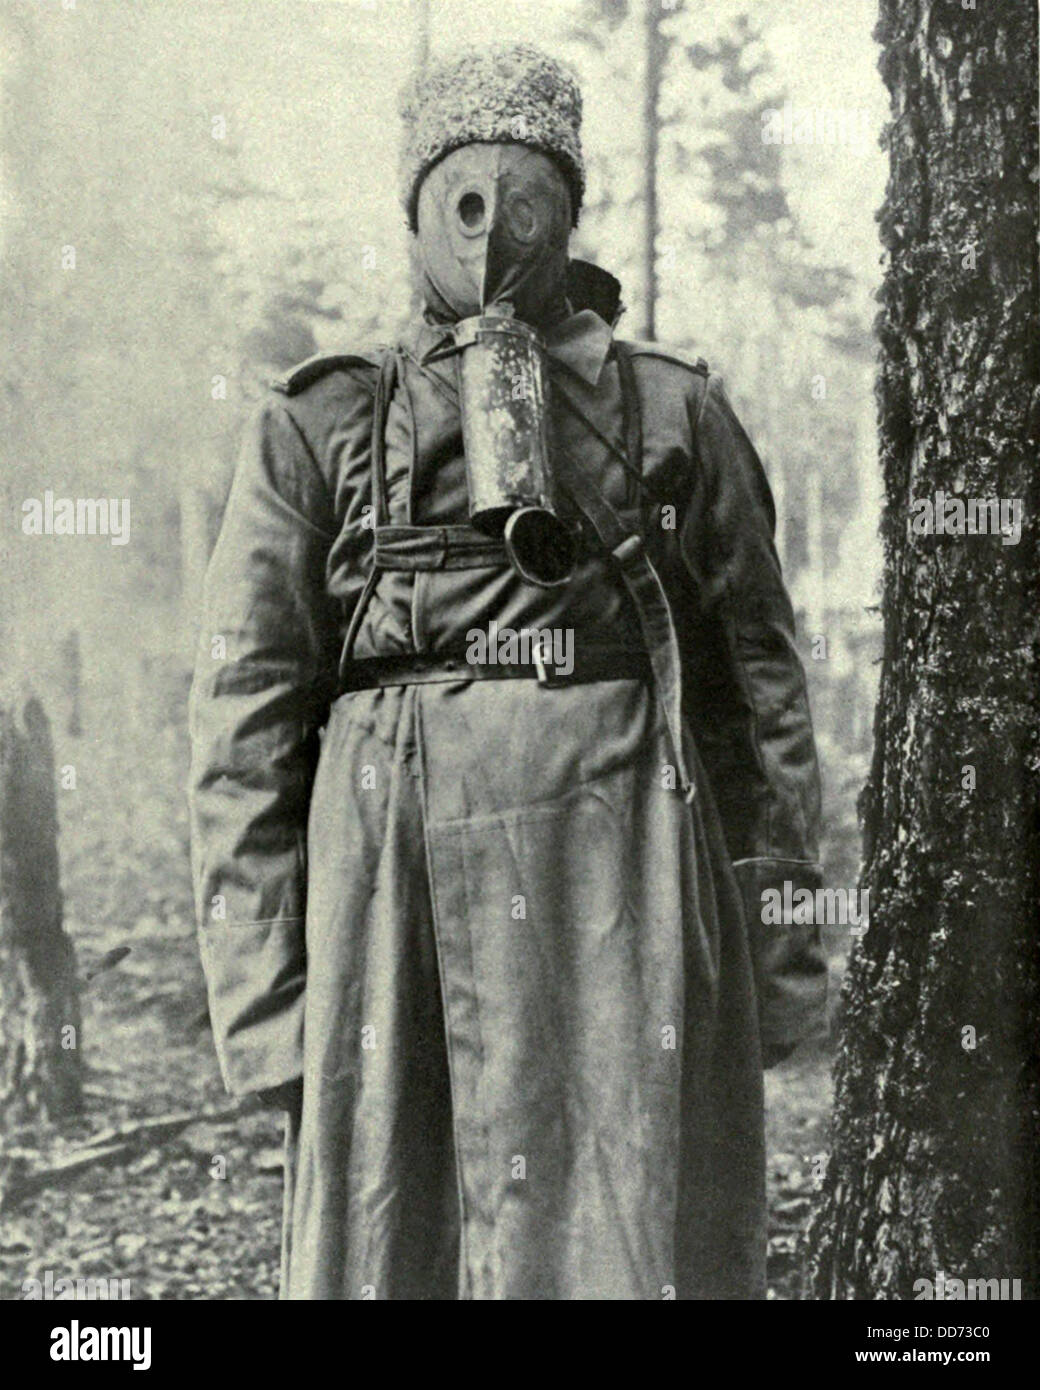 Russian primitive type of gas mask used in WW1. 1917. The rubber mask covers the face and the soldier breaths through a hole on Stock Photo